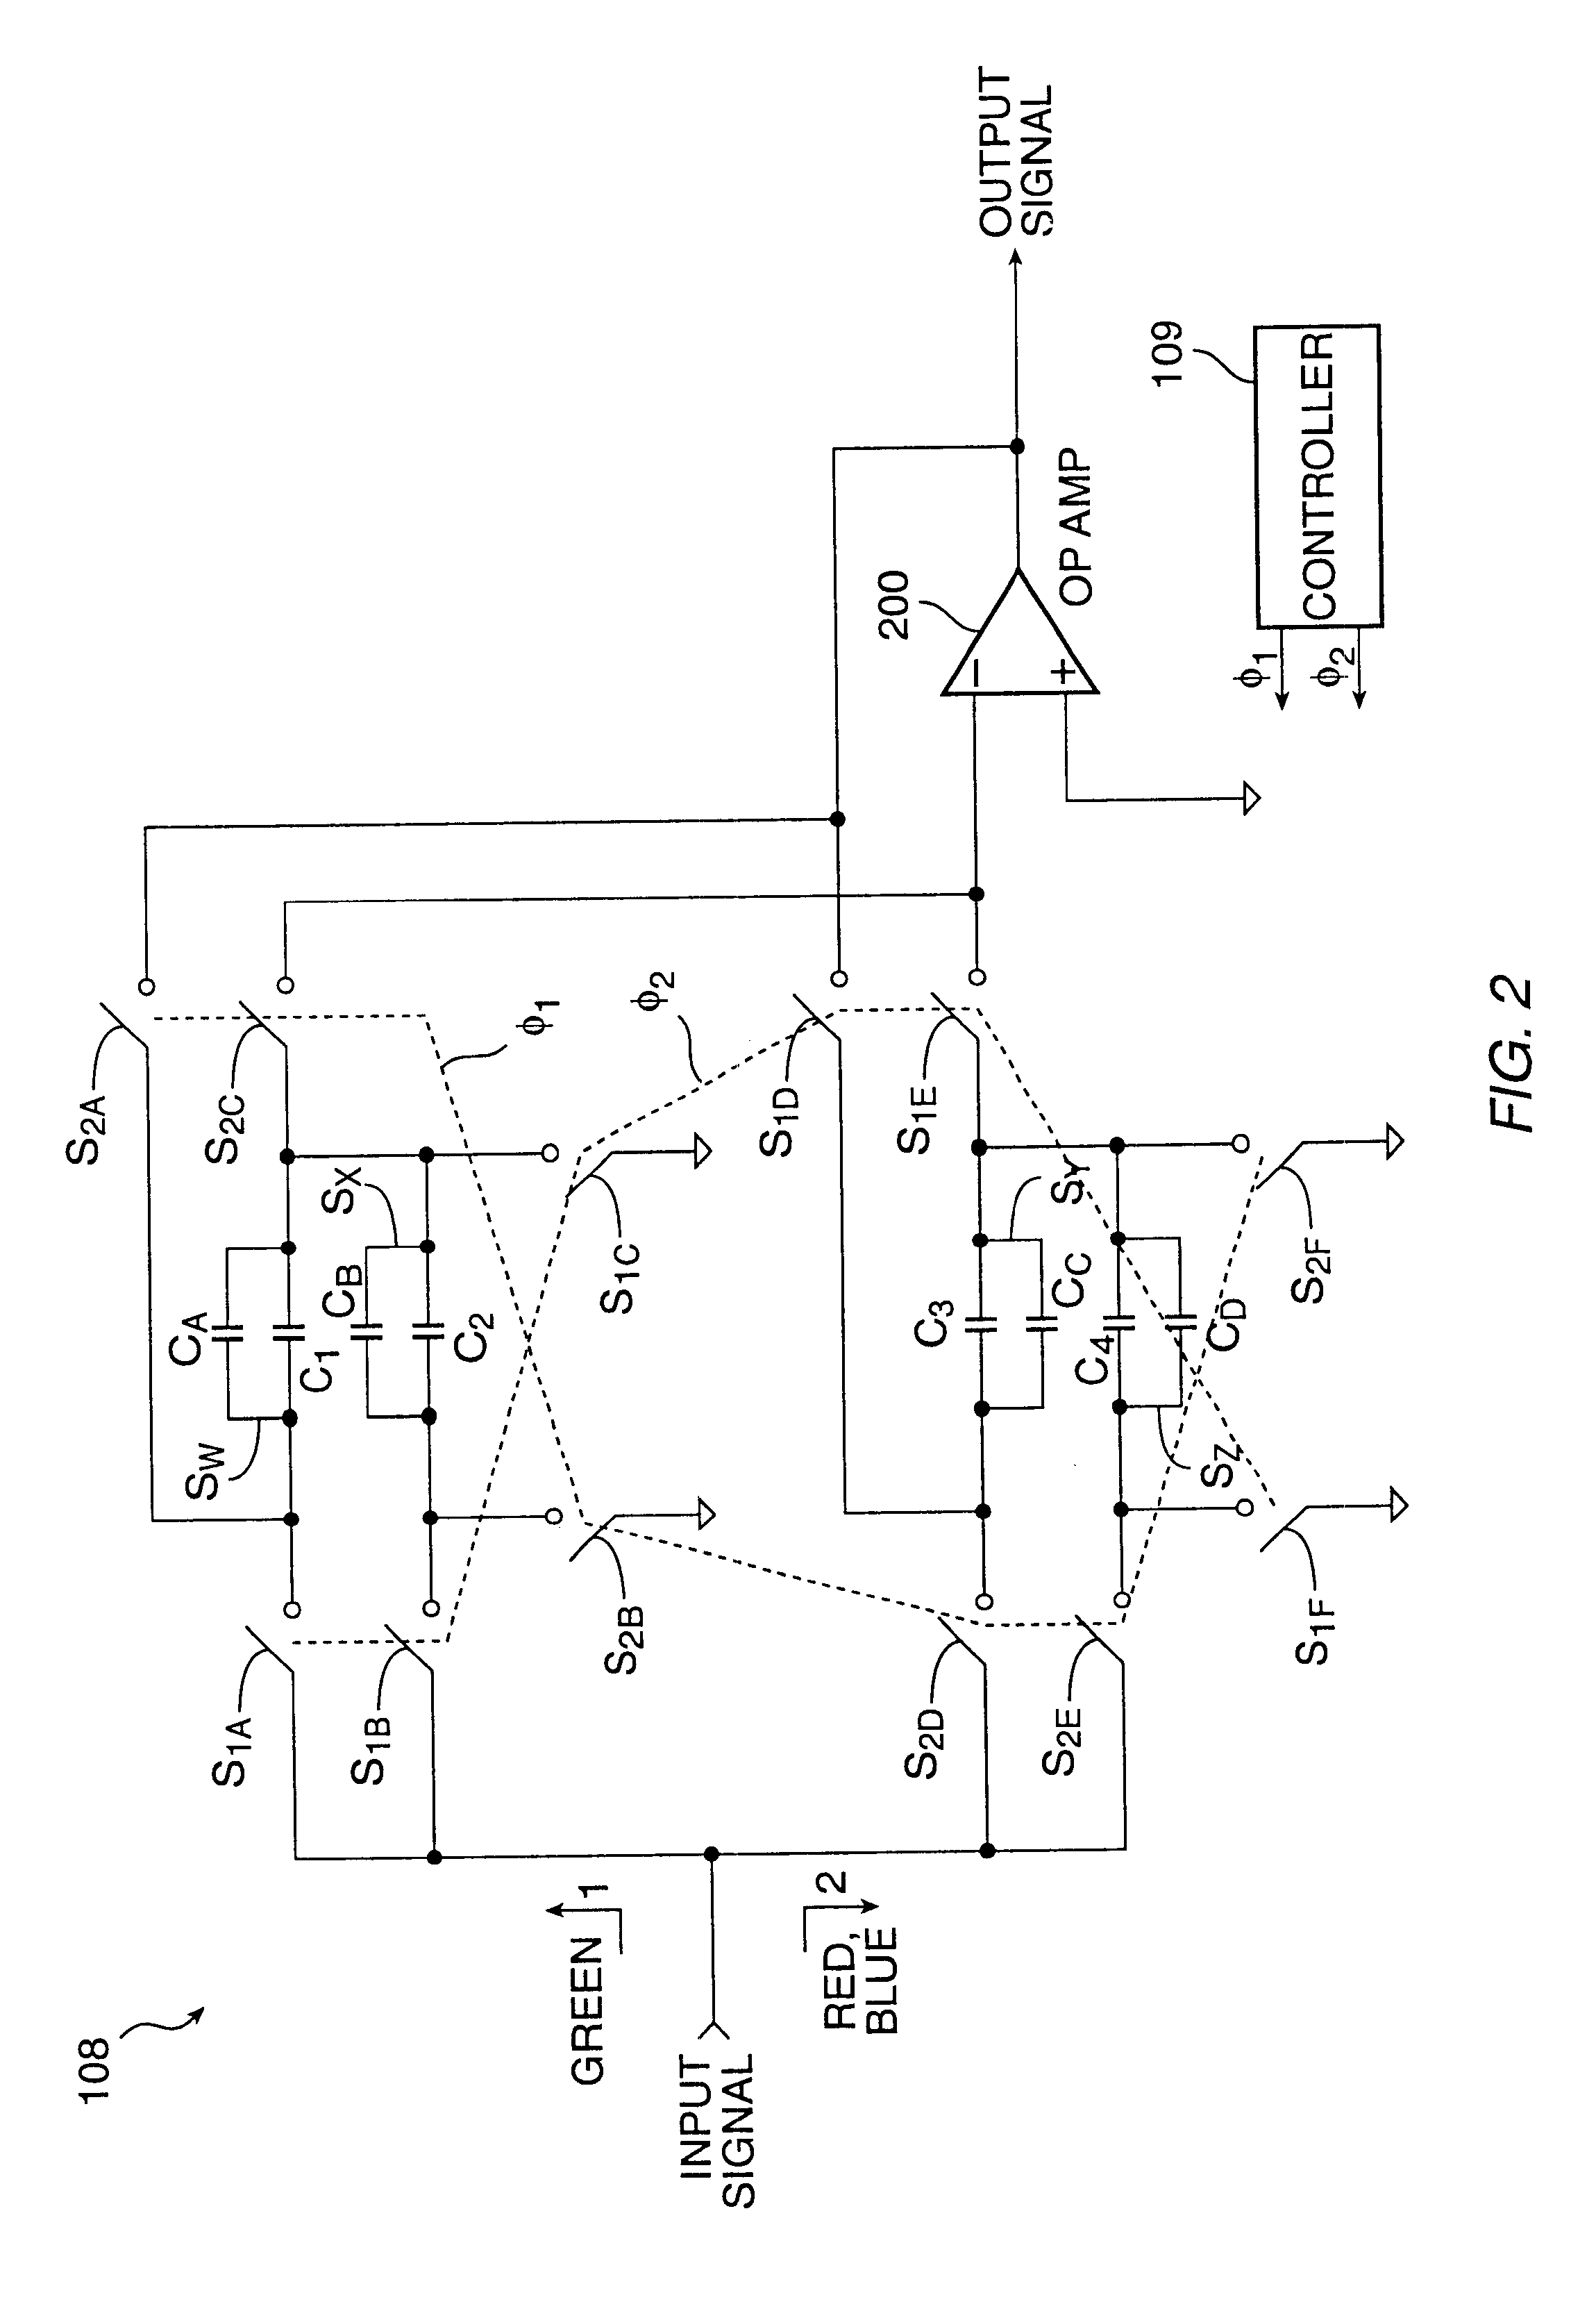 Power saving method using interleaved programmable gain amplifier and A/D converters for digital imaging devices